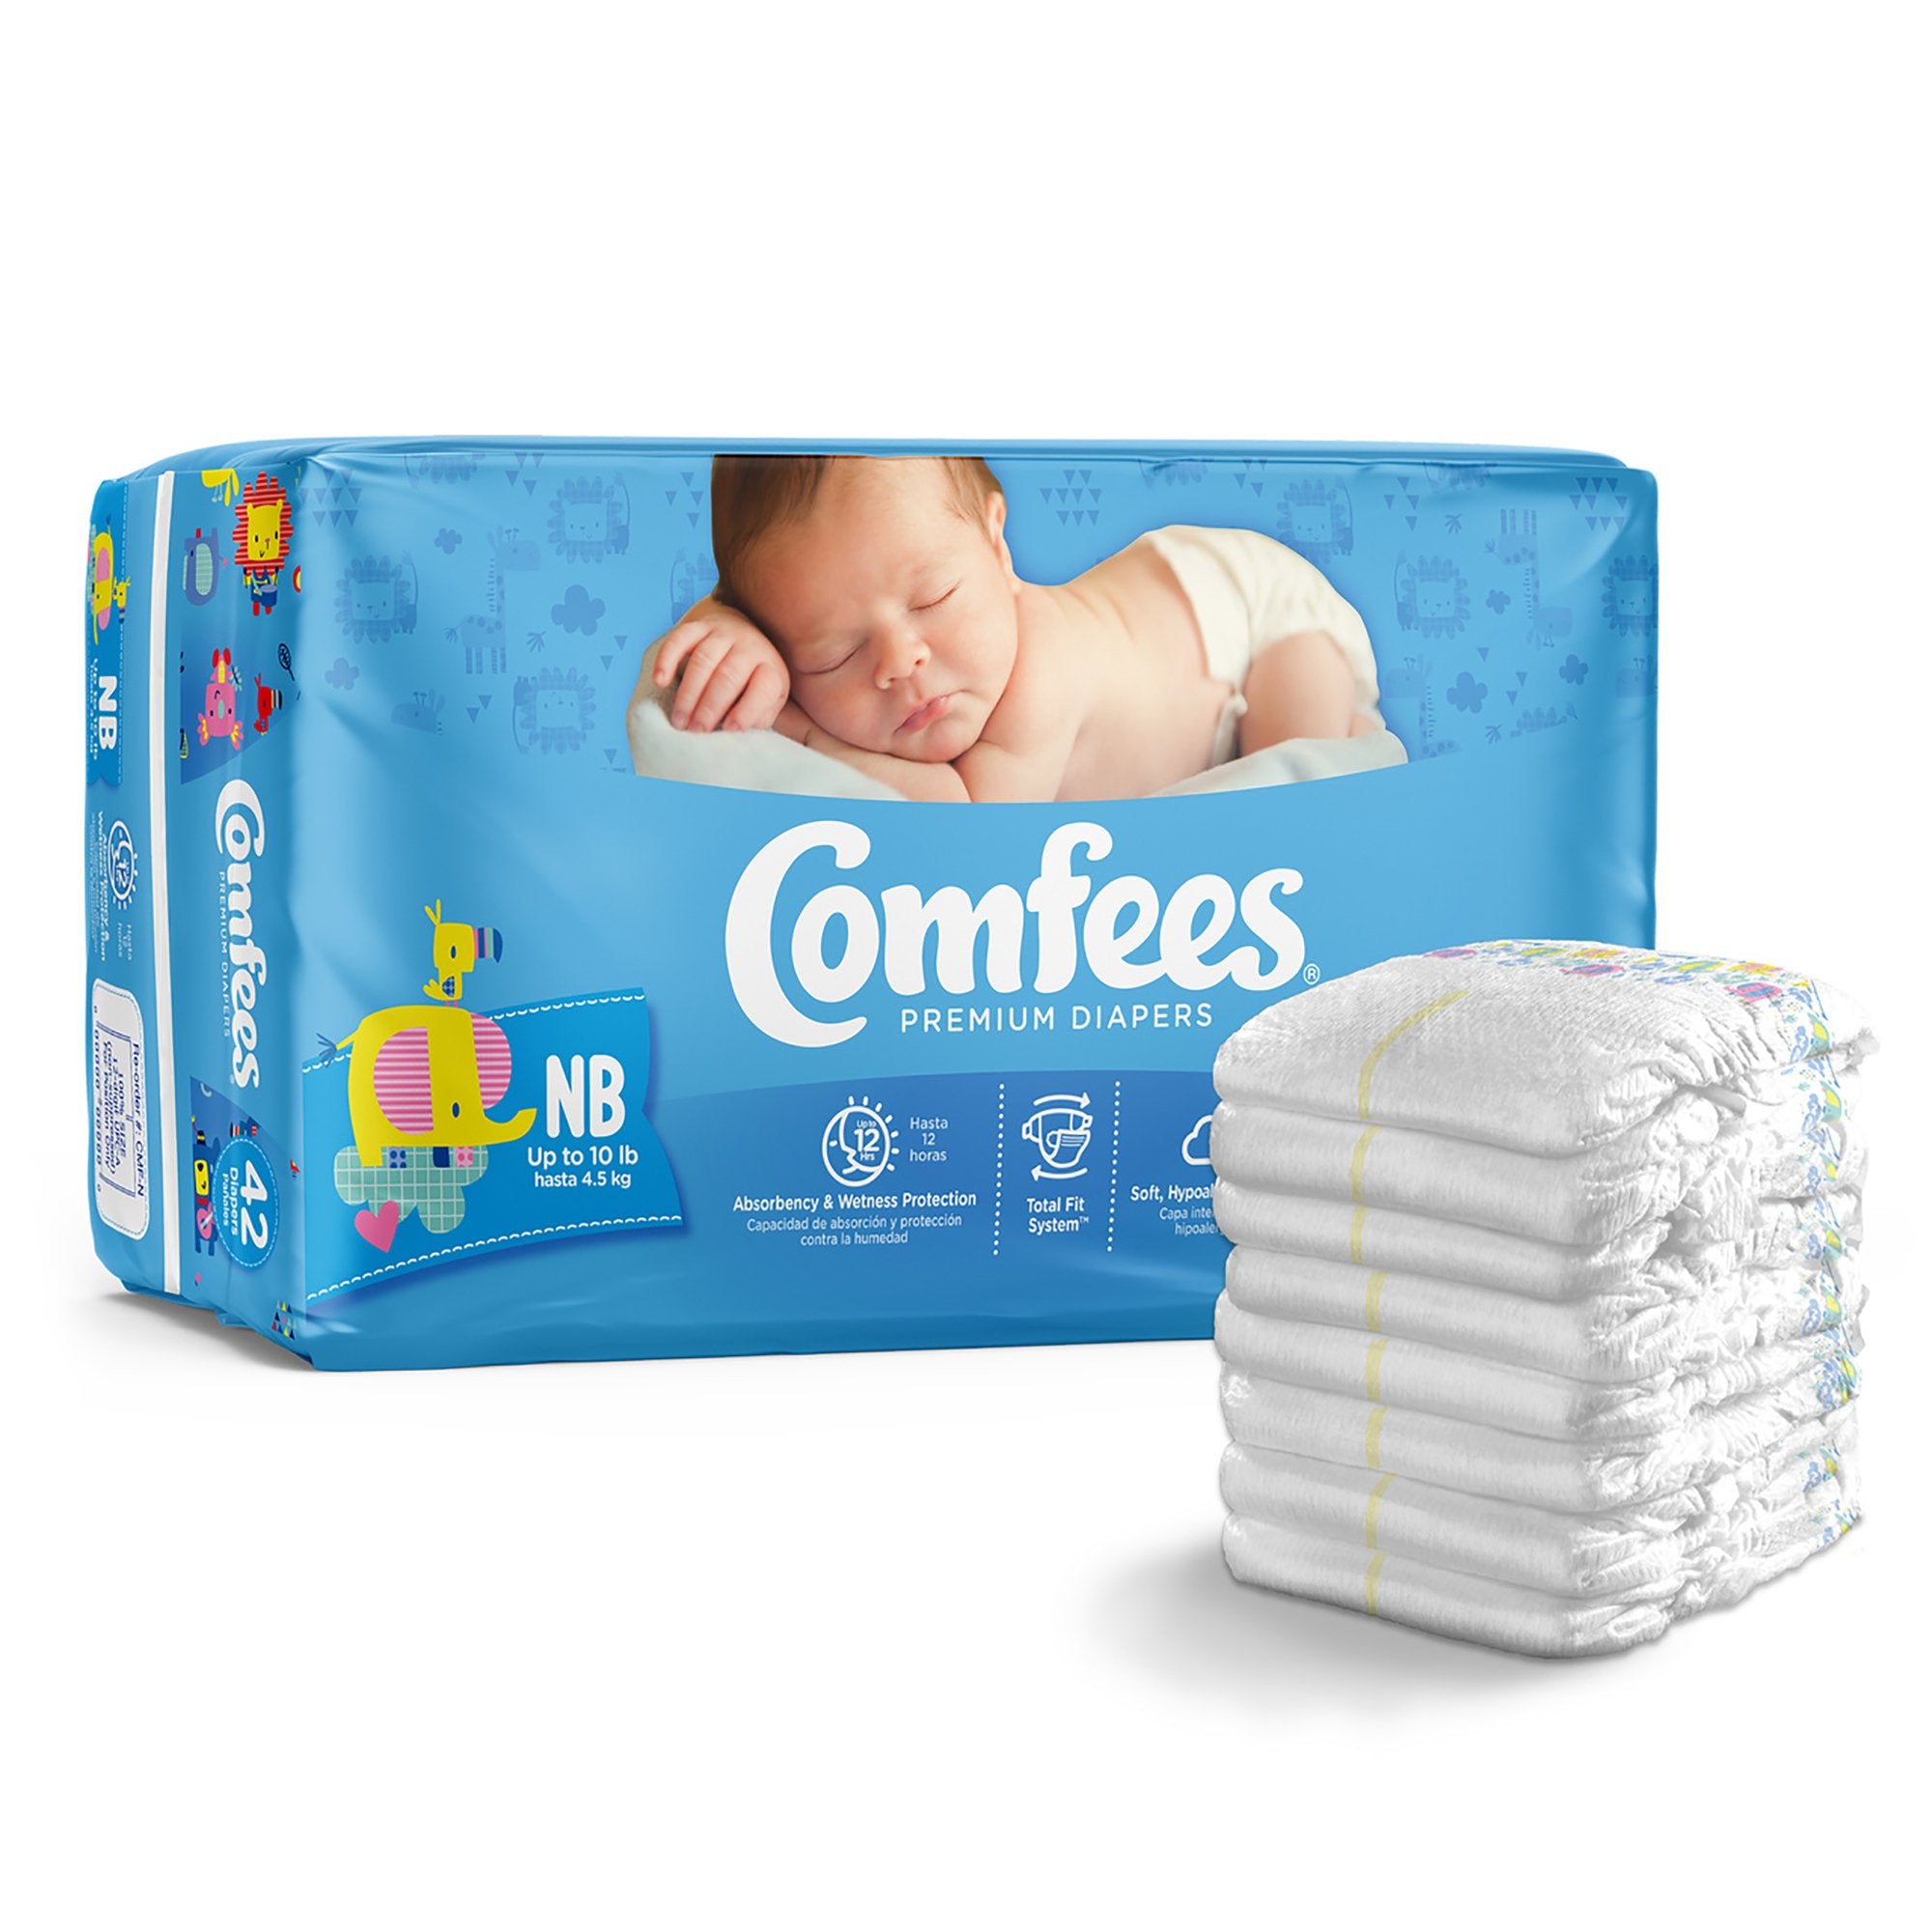 Unisex Baby Diaper Comfees Newborn Disposable Moderate Absorbency